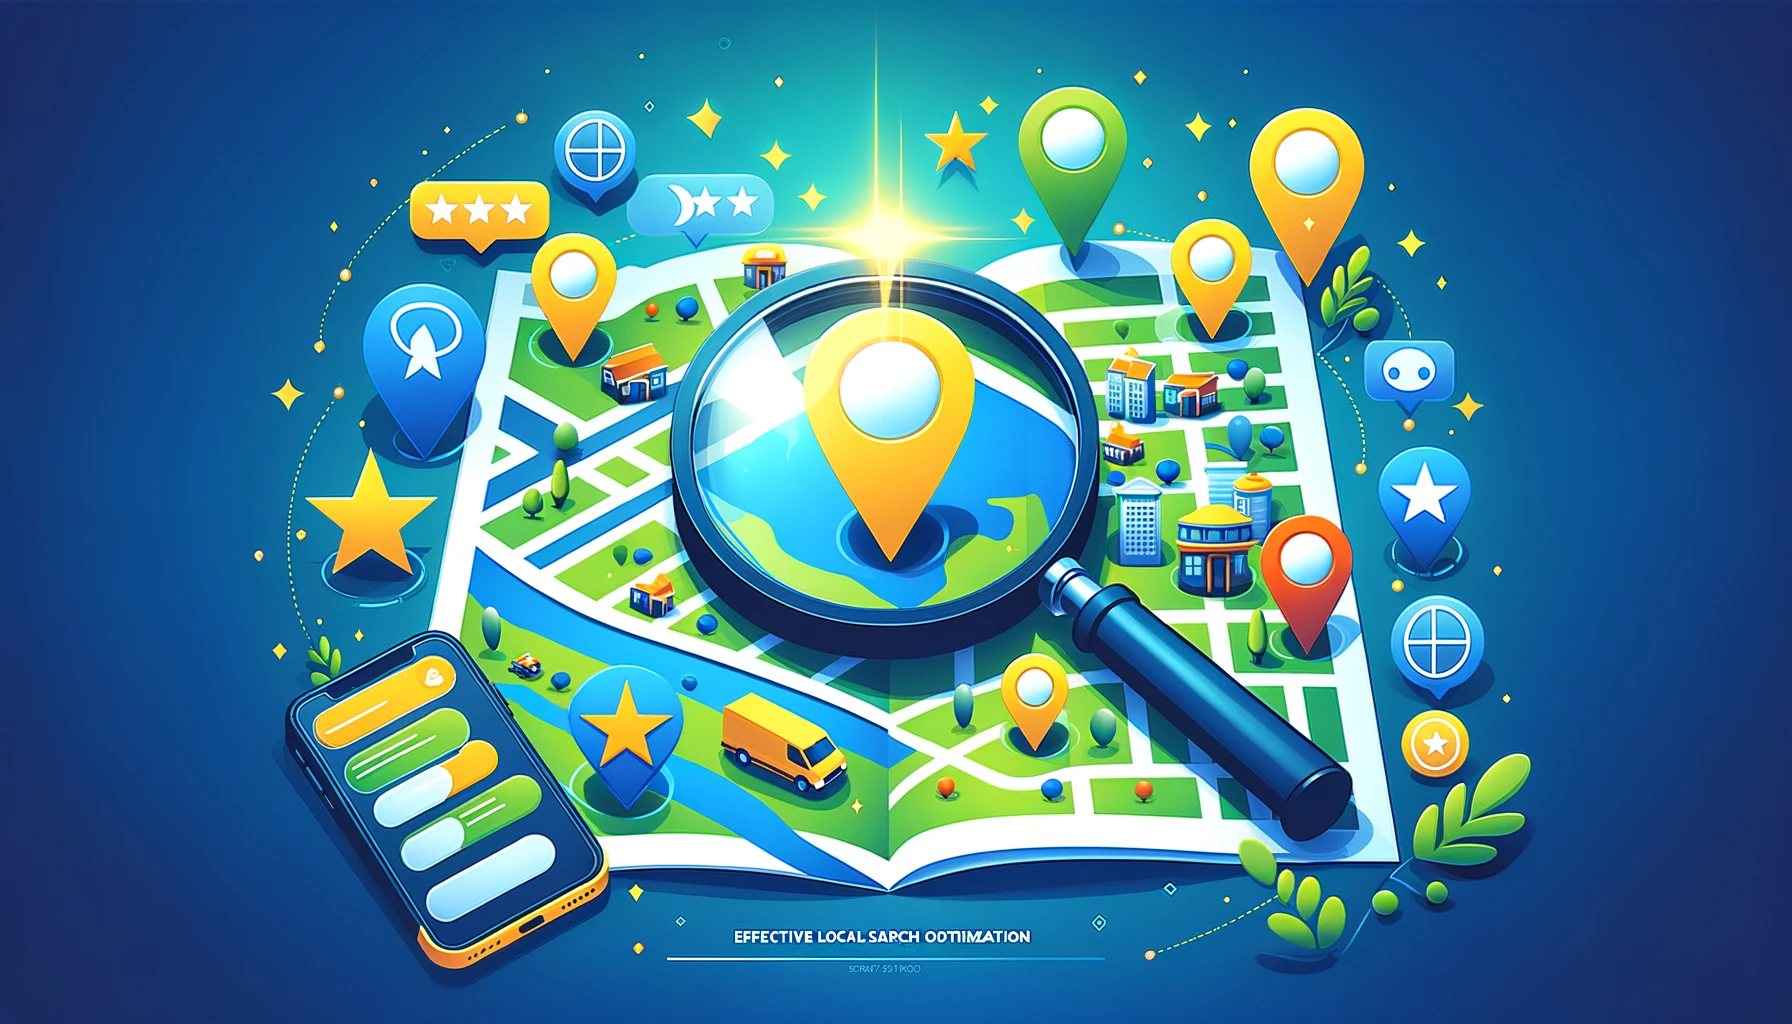 Image illustrating the concept of effective local SEO, showing a vibrant map with local landmarks and businesses marked with pins under a magnifying glass, highlighting the importance of local visibility and optimization.